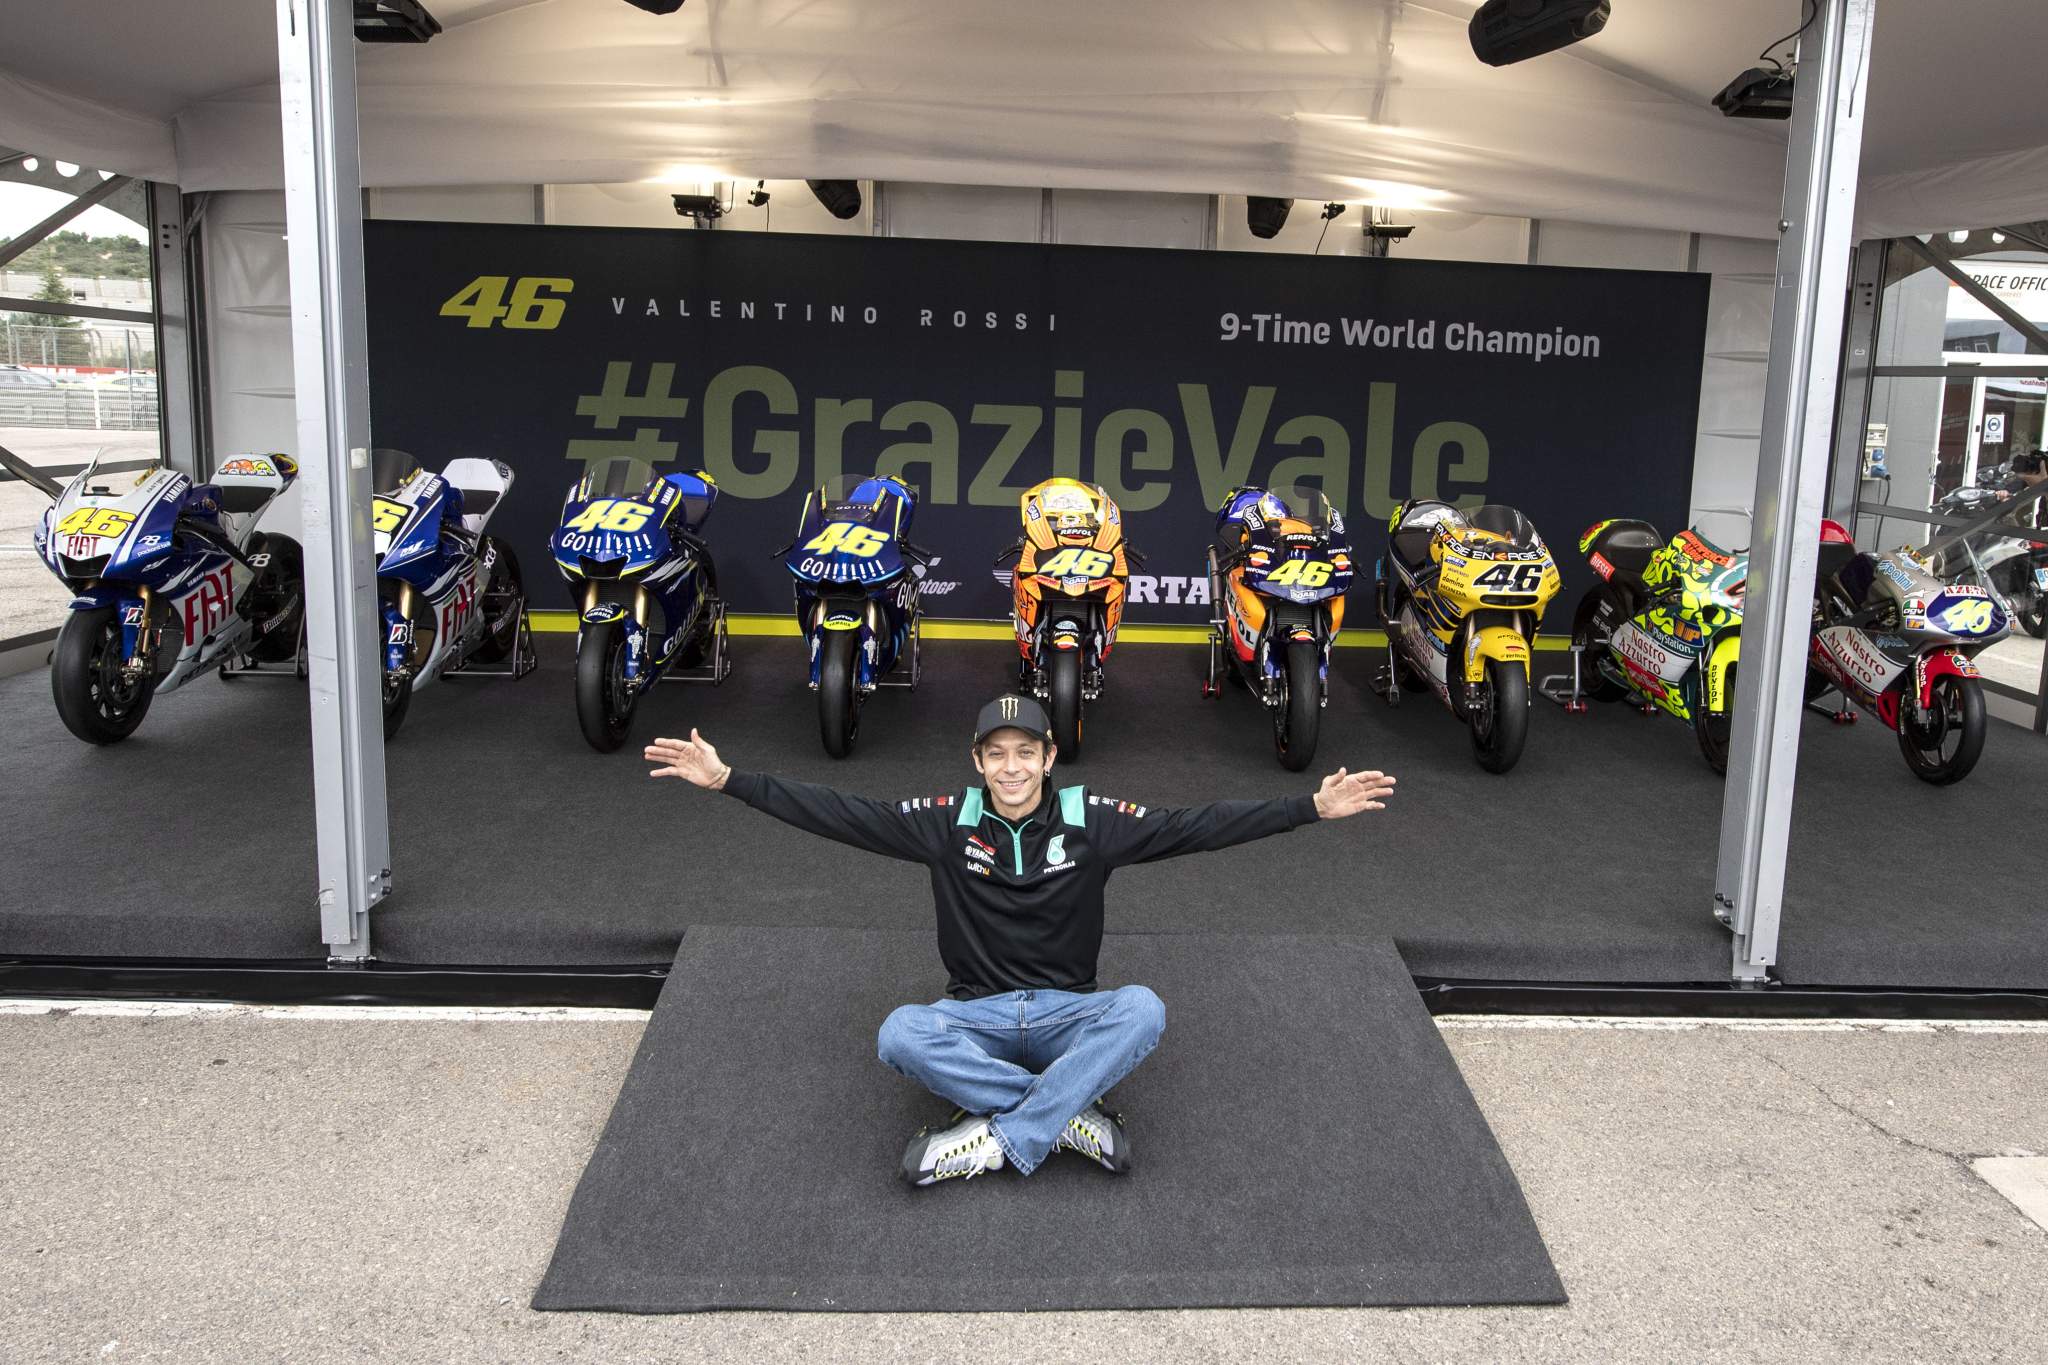 The polar opposite MotoGP farewell rivalling the Rossi show - The Race